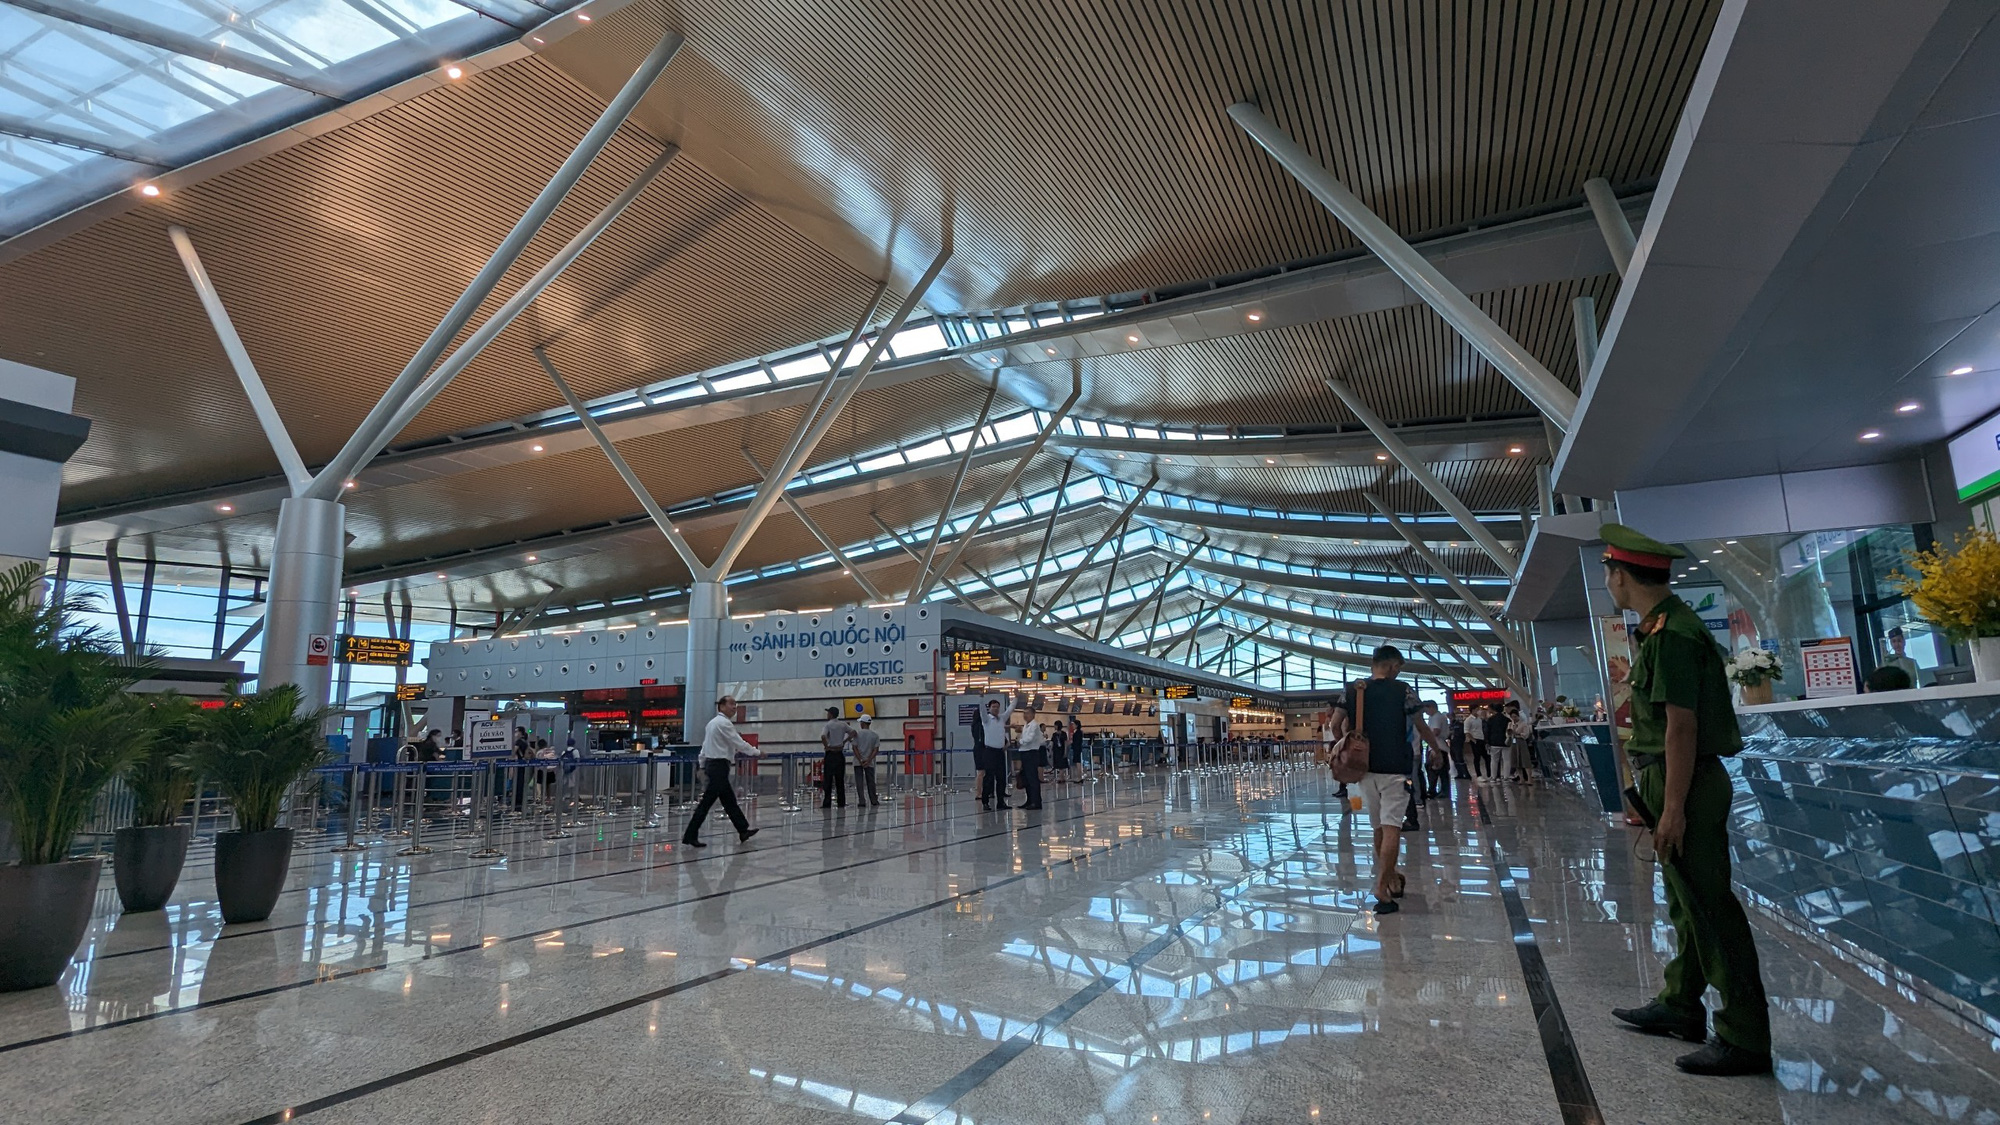 The interior of the T2 Terminal of Phu Bai International Airport in Thua Thien-Hue Province, central Vietnam. Photo: Nhat Linh / Tuoi Tre